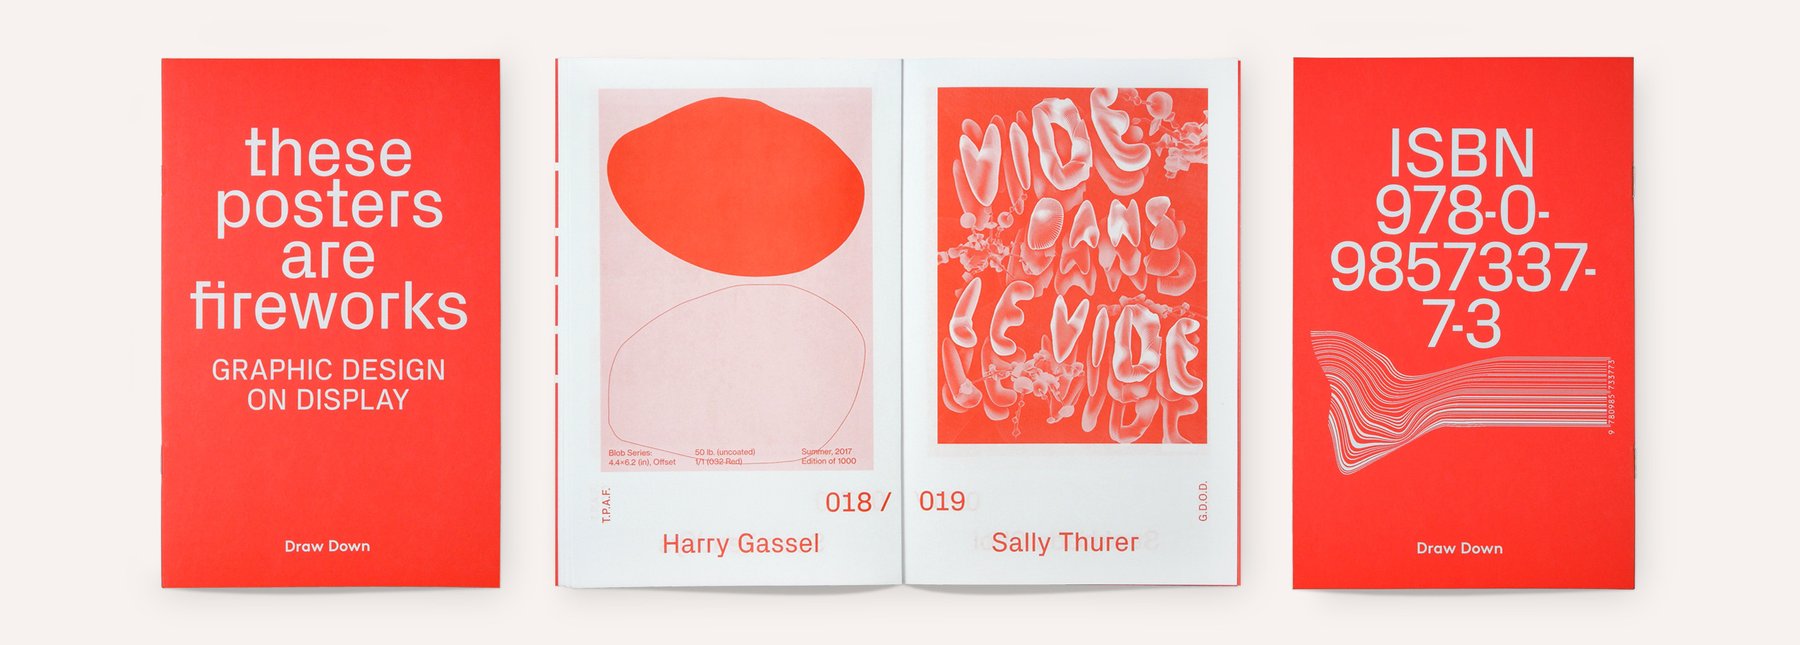 These Posters Are Fireworks  - Graphic Design on Display